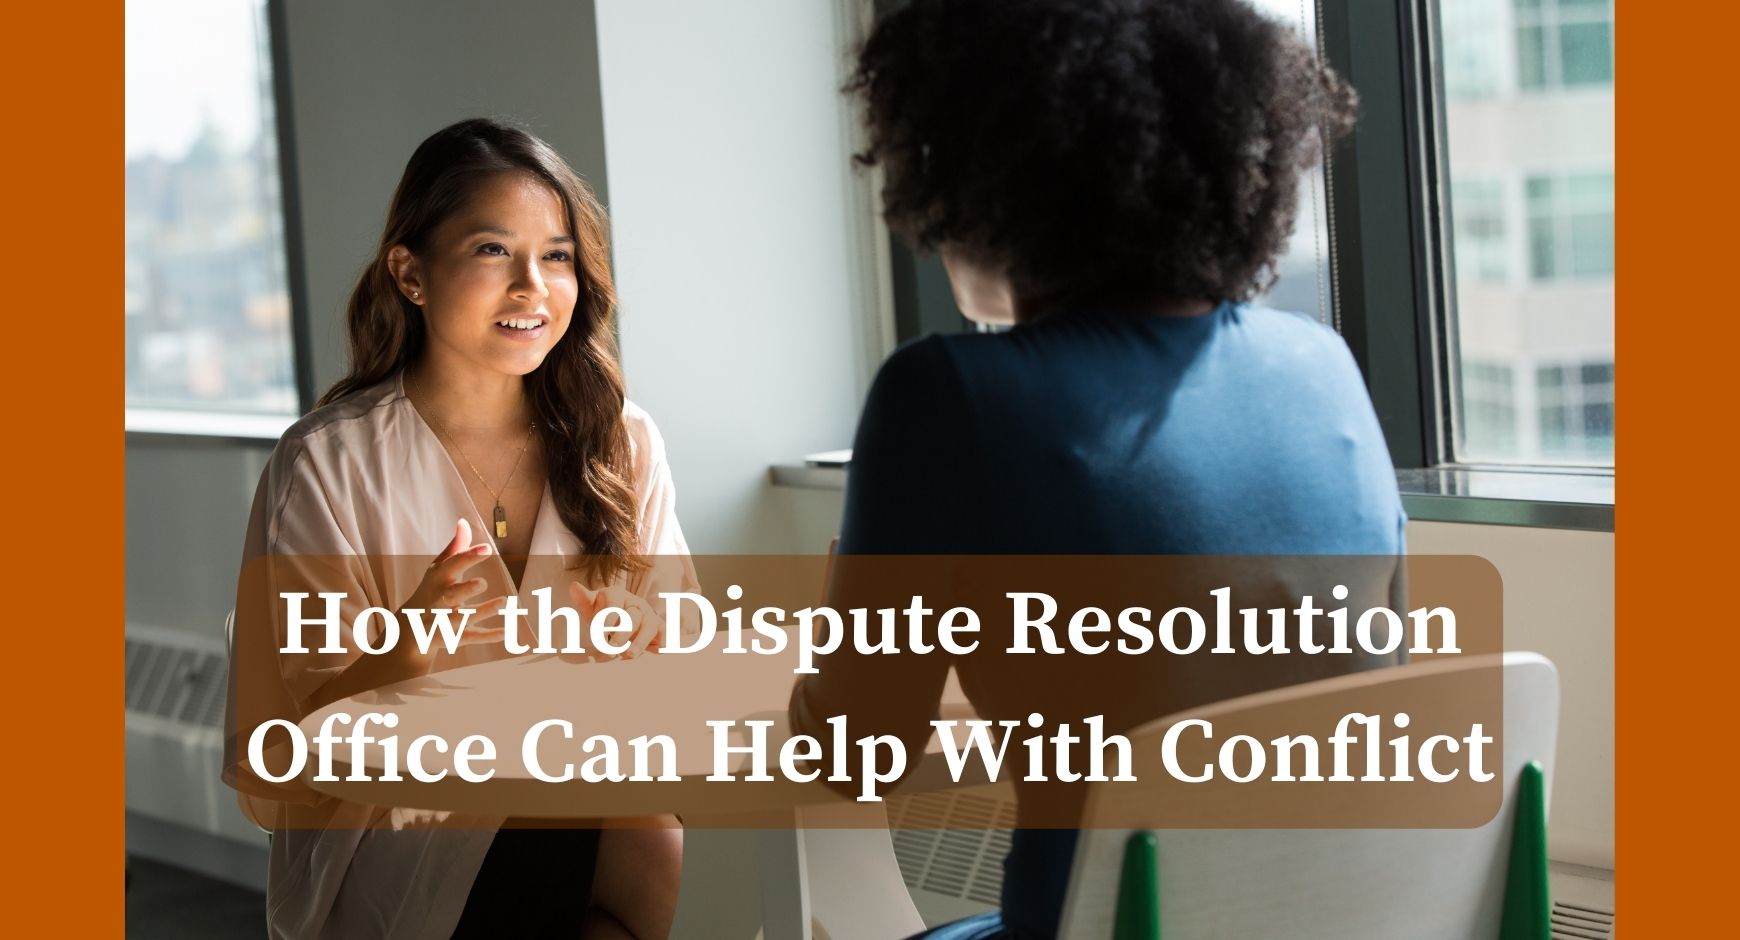 Two women sitting at a table having a discussion under words that read "How the Dispute Resolution Office Can Help With Conflict"